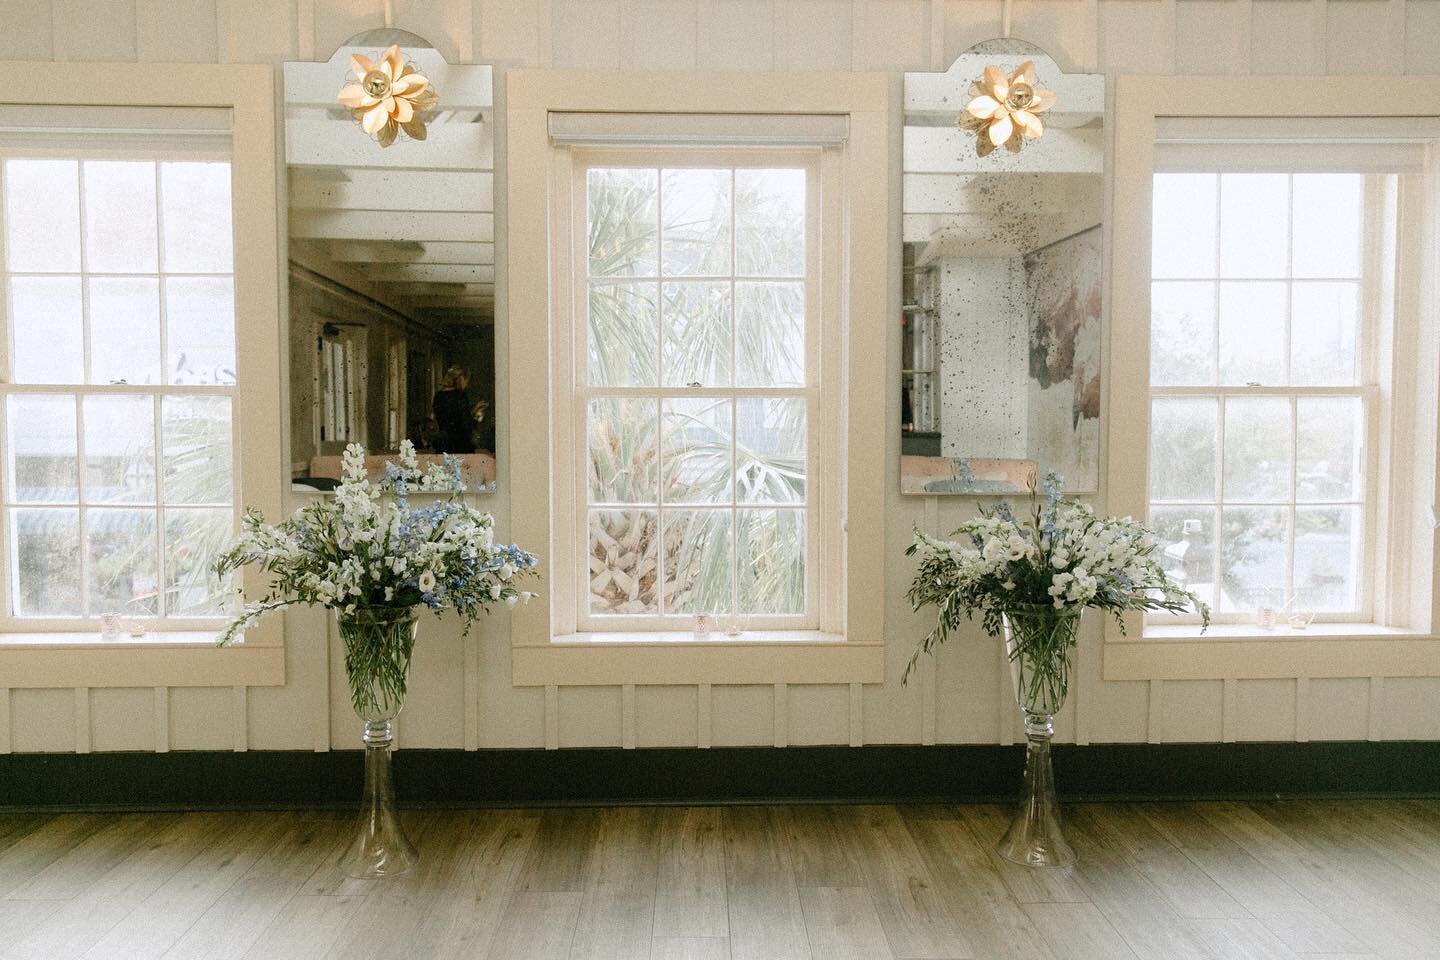 One of our favorite details are statement ceremony pieces perfectly lined up with this beautiful ceremony backdrop! 
.
.
.
Wedding Planner: @marissadaniellaevents 
Venue: @parcel32 @pphgevents 
Photography: @rianfullerphotography 
Floral: @festooncha